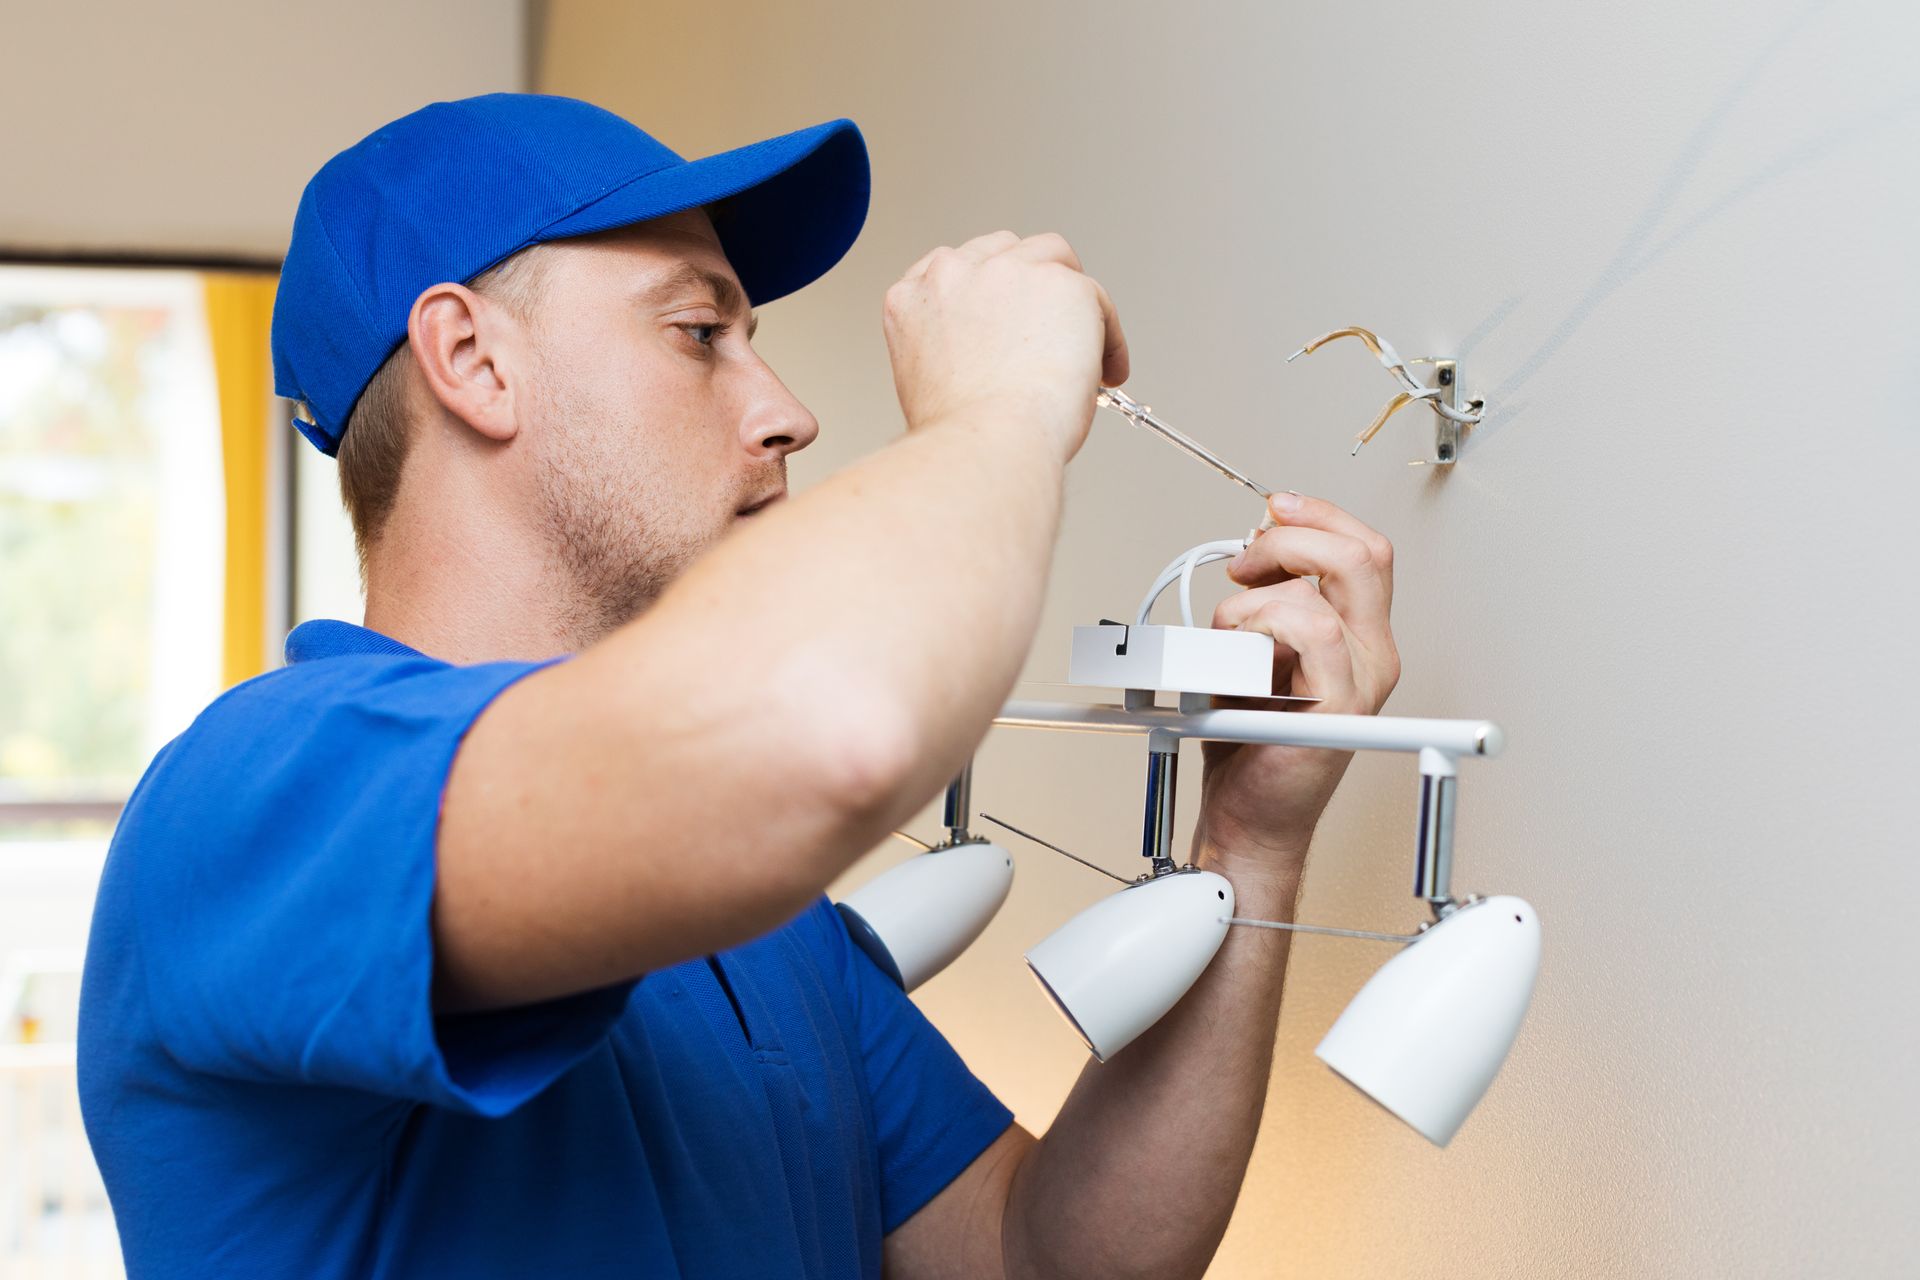 A man is installing a light fixture on a wall.